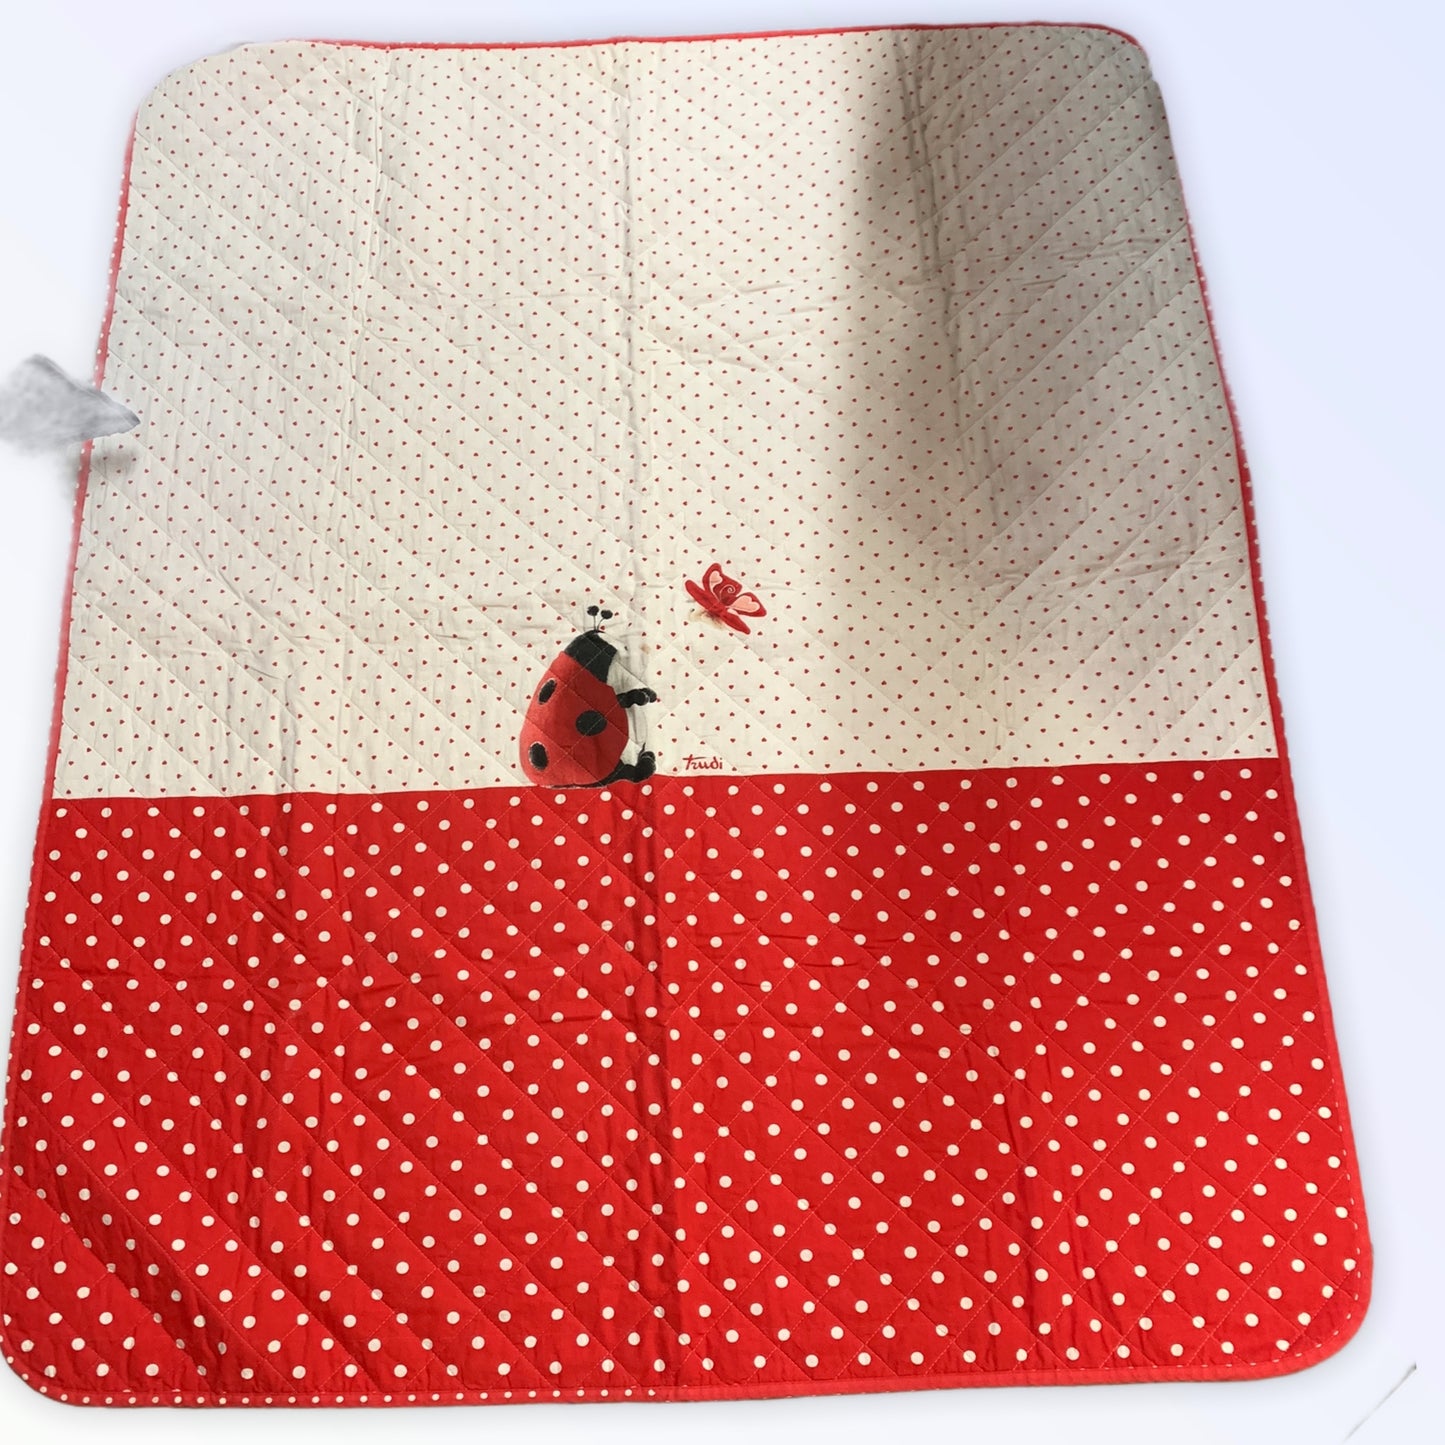 Trudi light quilted bedspread with ladybug